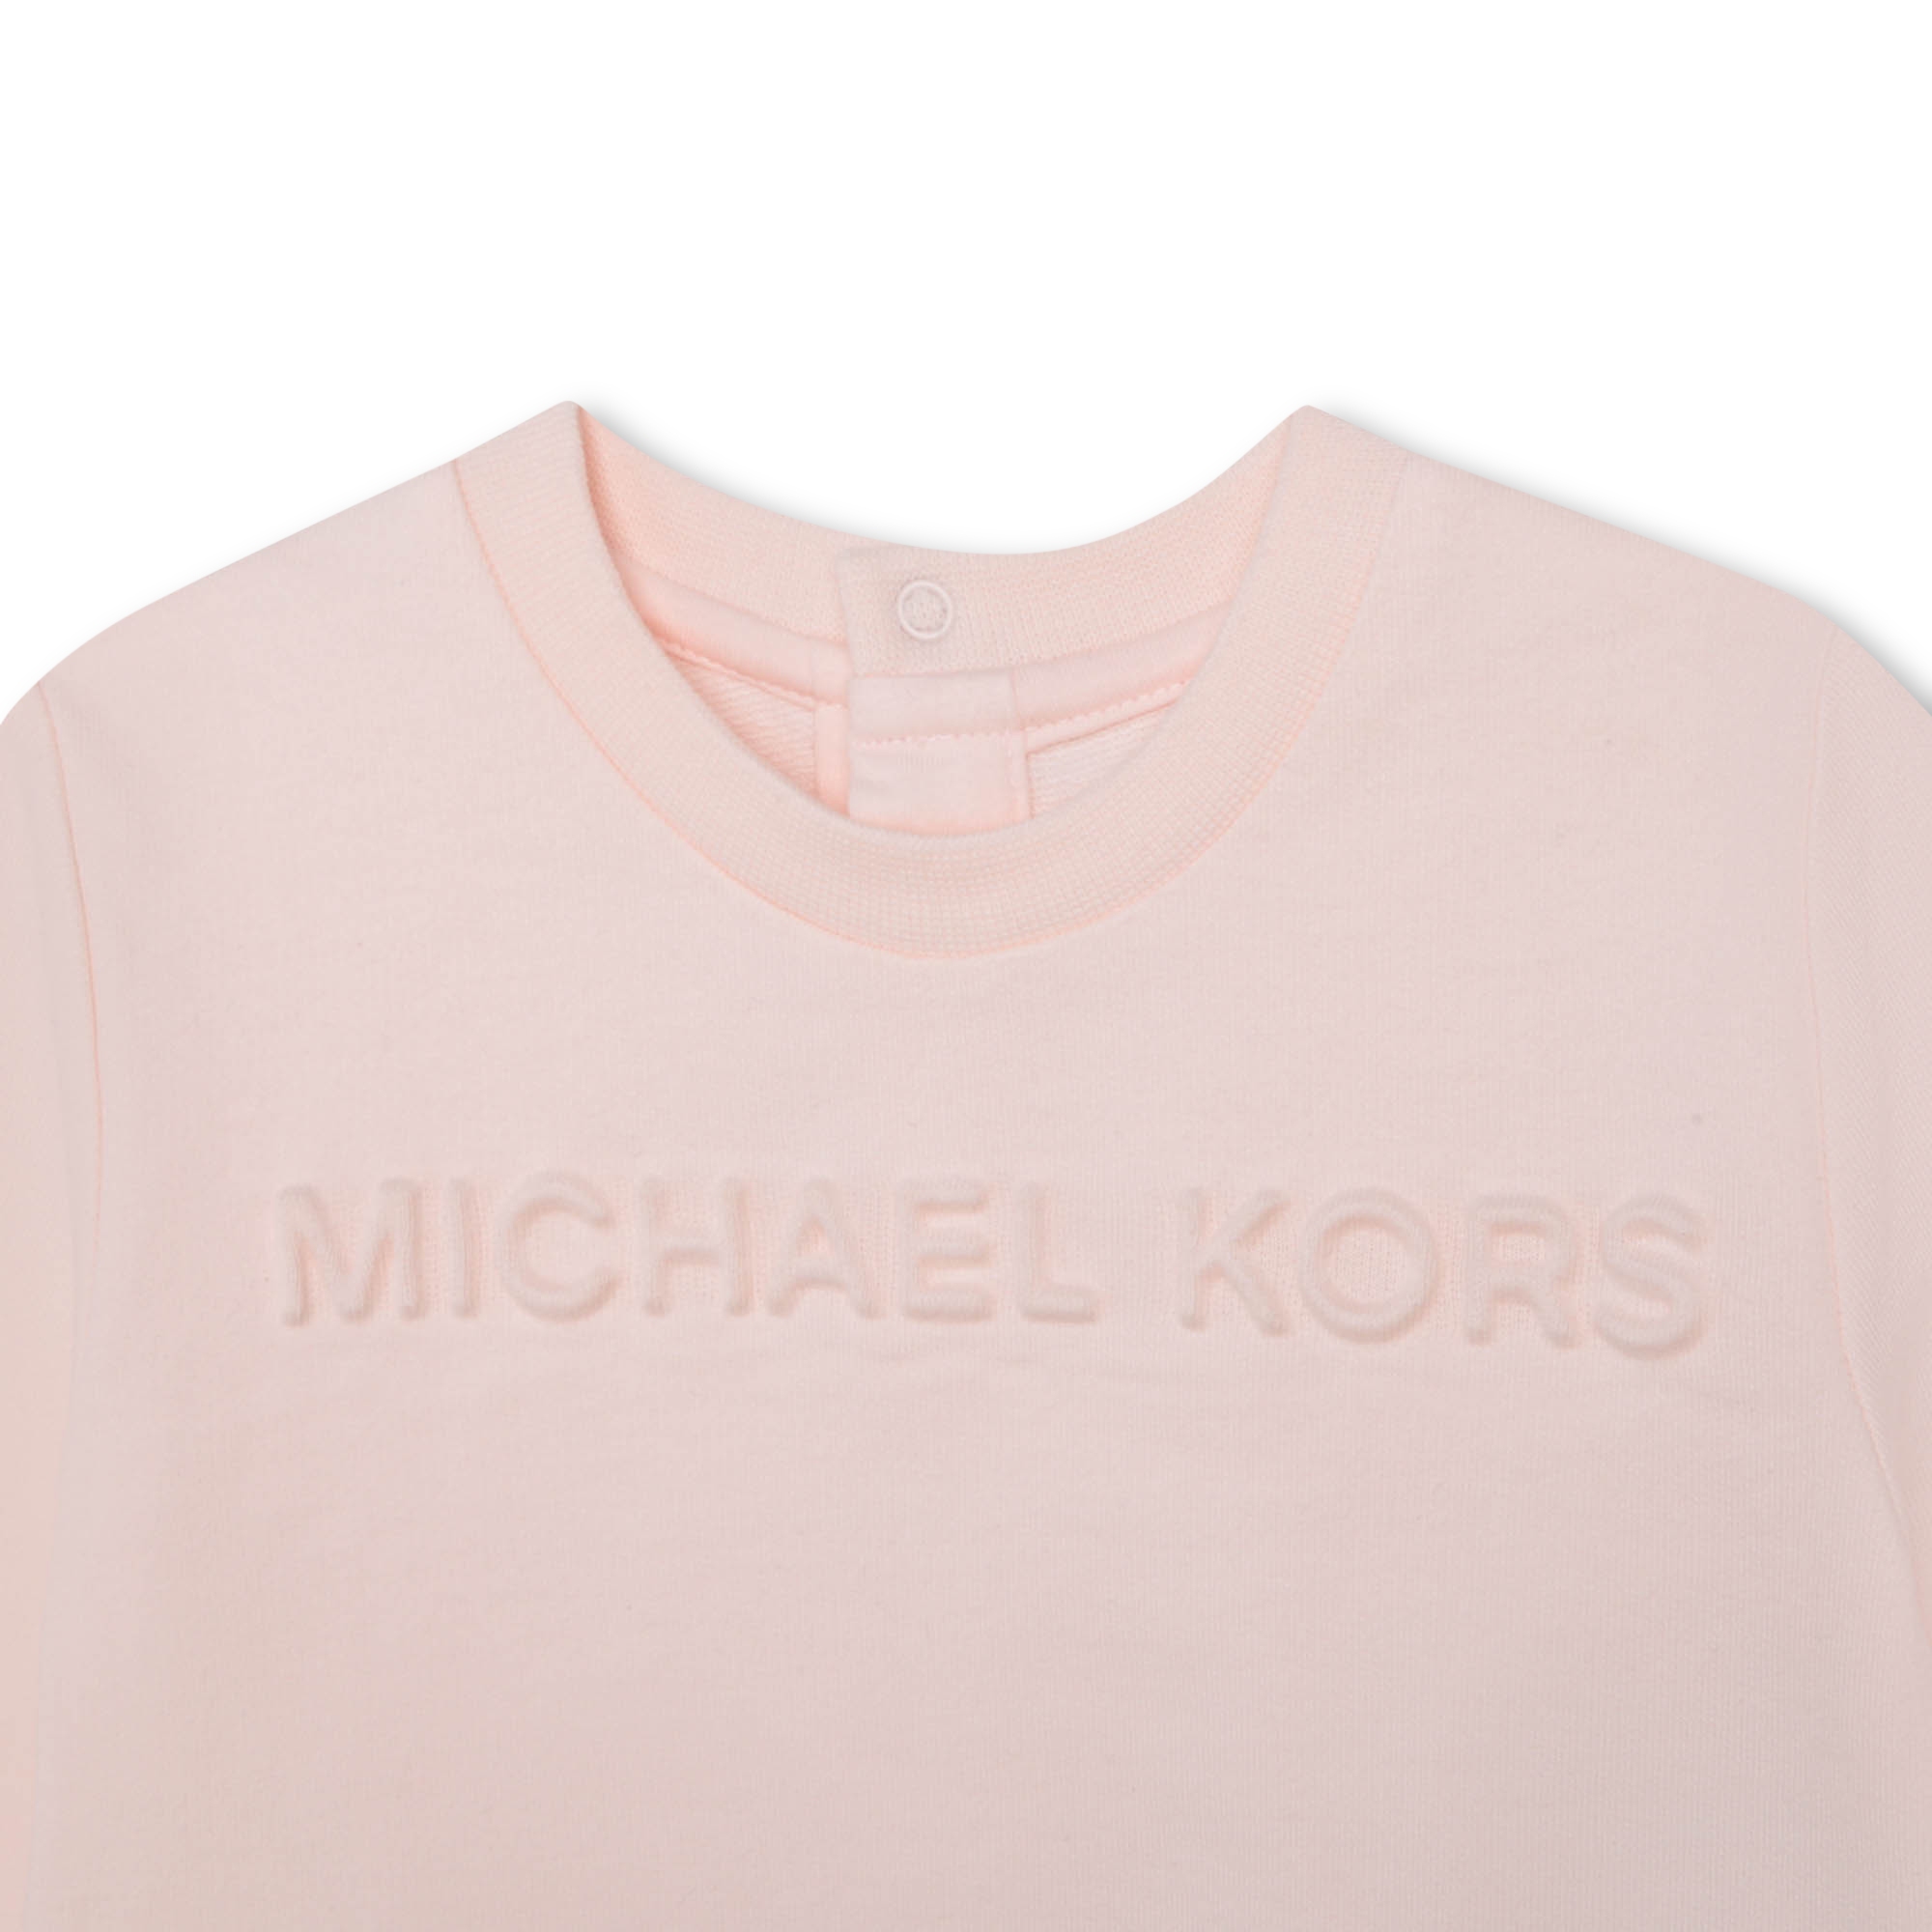 Cotton sweatshirt and trousers MICHAEL KORS for UNISEX